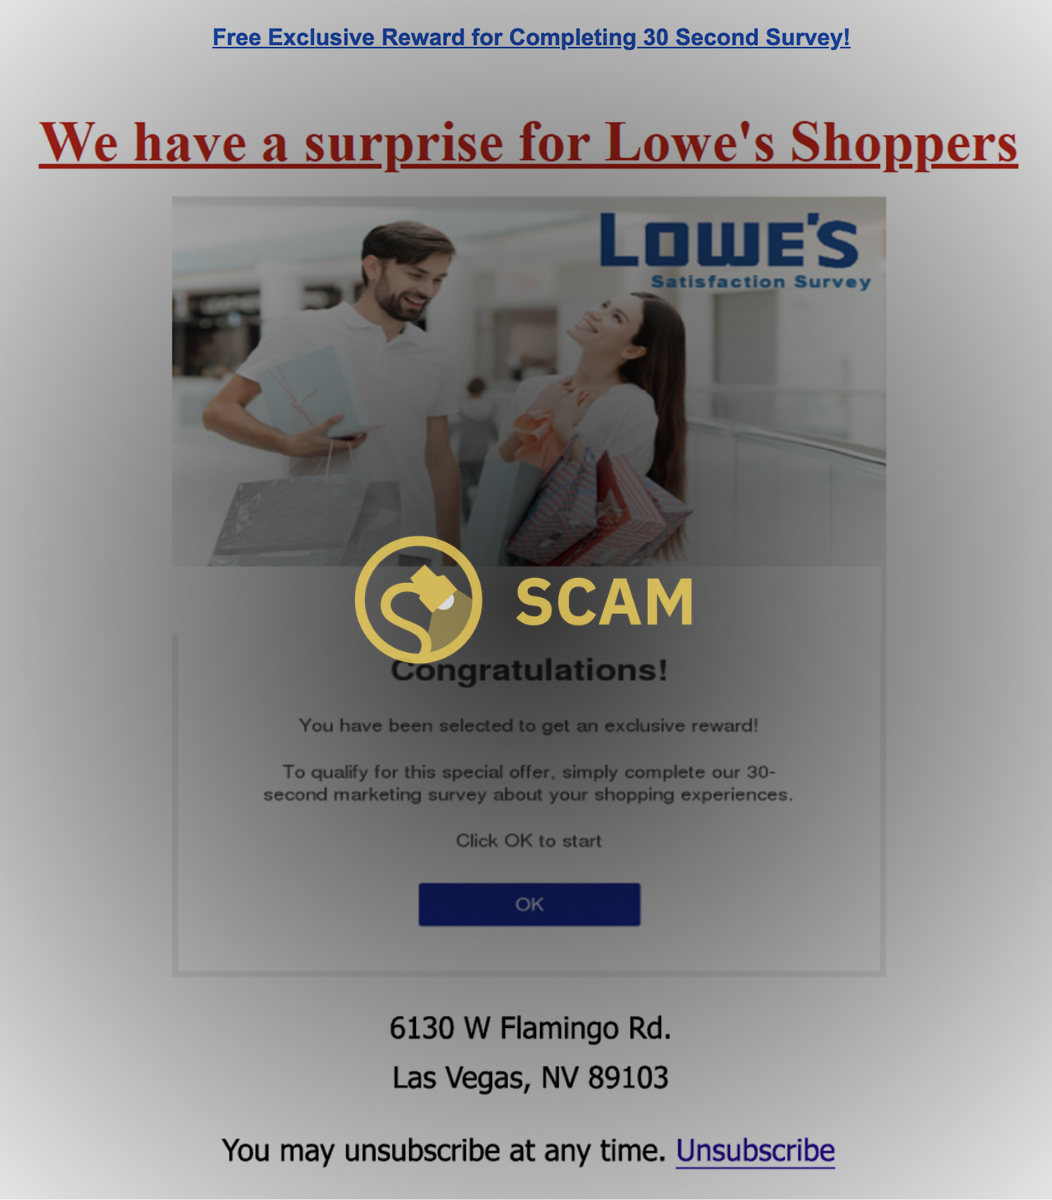 Lowe's was not offering an exclusive reward for taking a 30-second survey because it was all a scam.